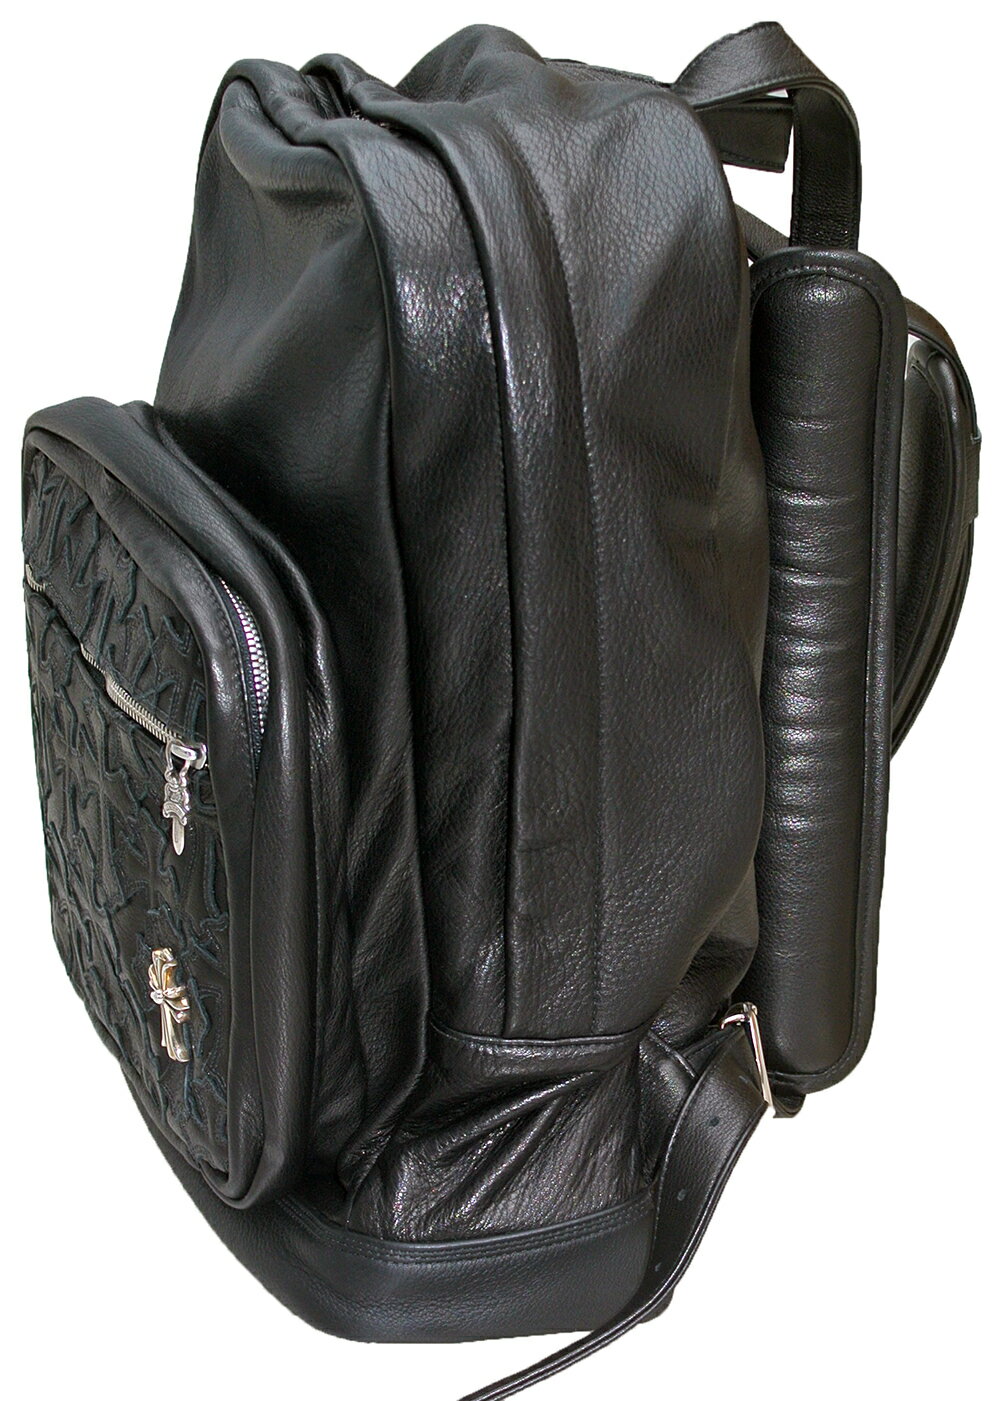 CHROME HEARTS 7TH GRADE BAG BACKPACK　BLACK LEATHER クロムハーツ　7TH GRADEバッグ　ブラックレザー　バックパック セメタリークロス